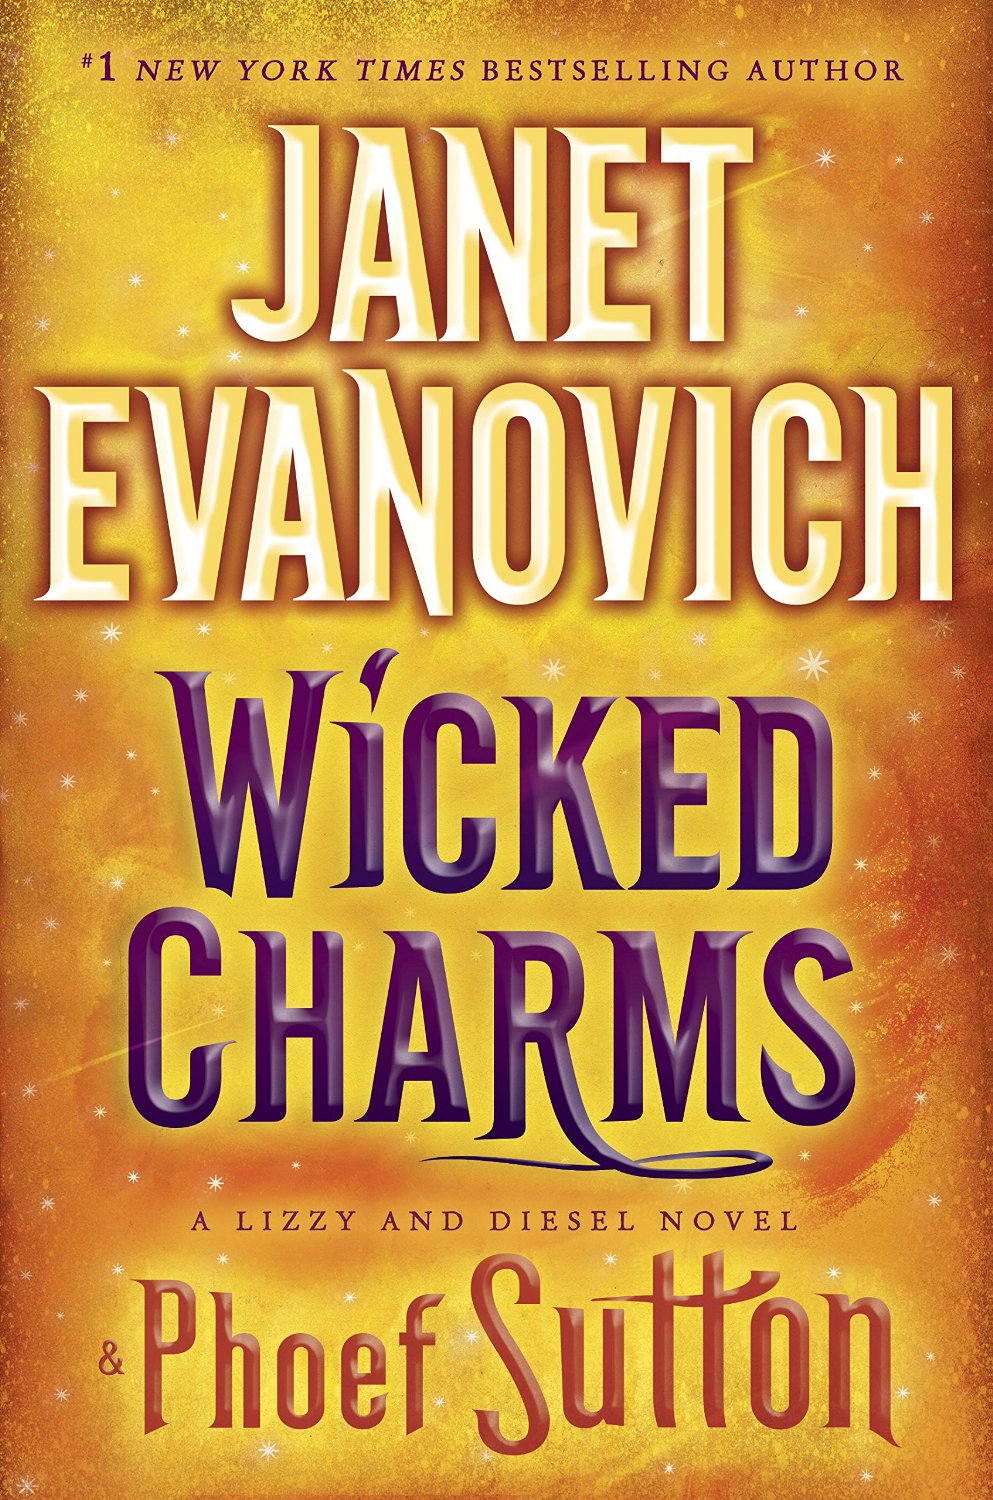 wicked business janet evanovich series